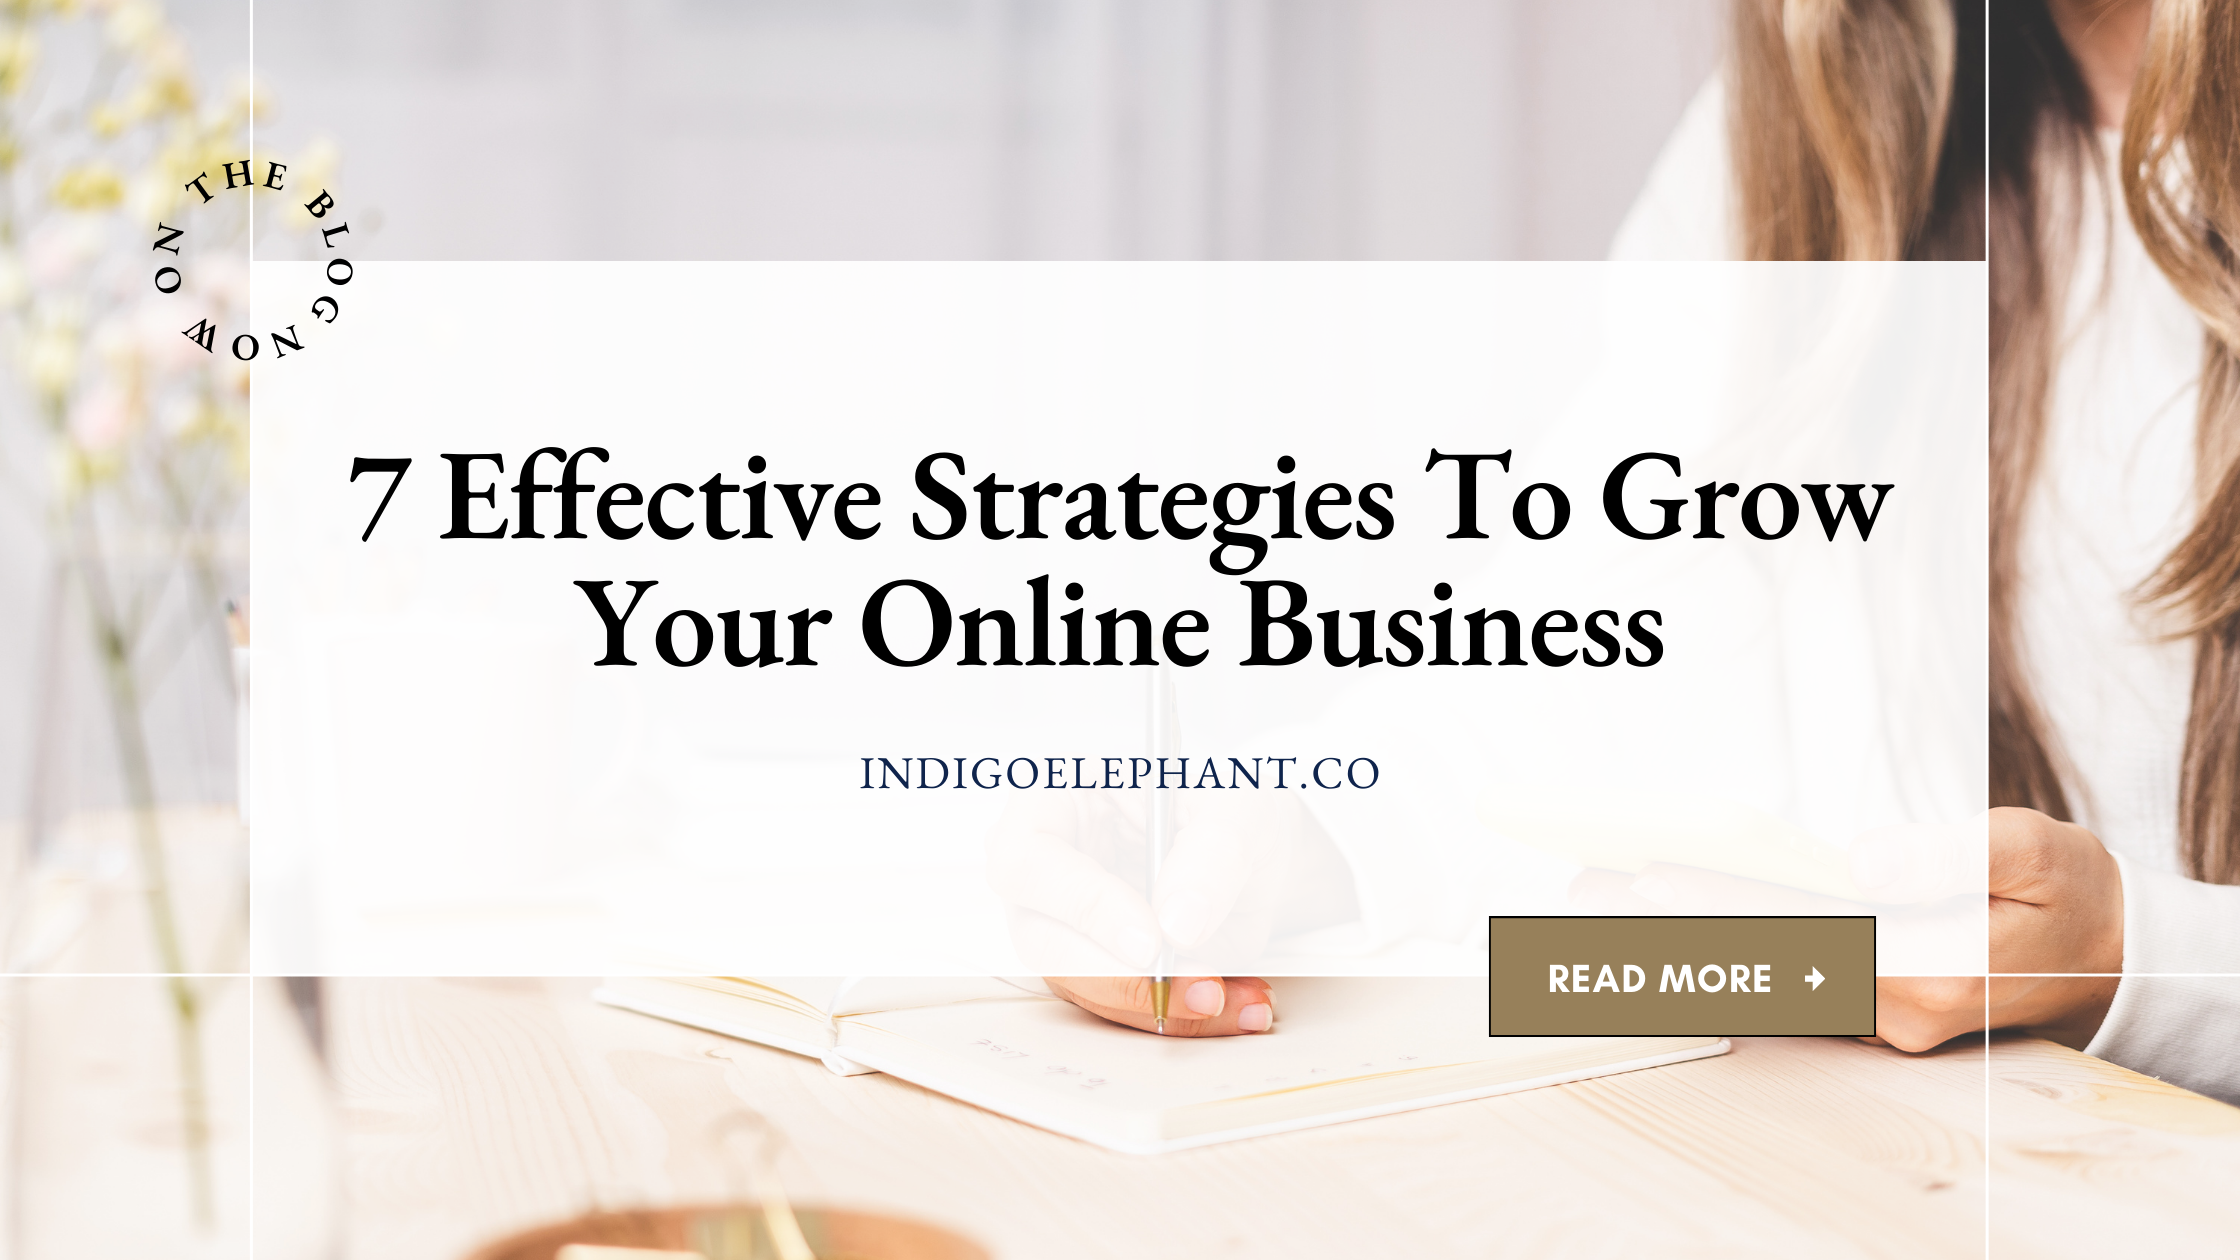 7 Effective Strategies To Grow Your Online Business